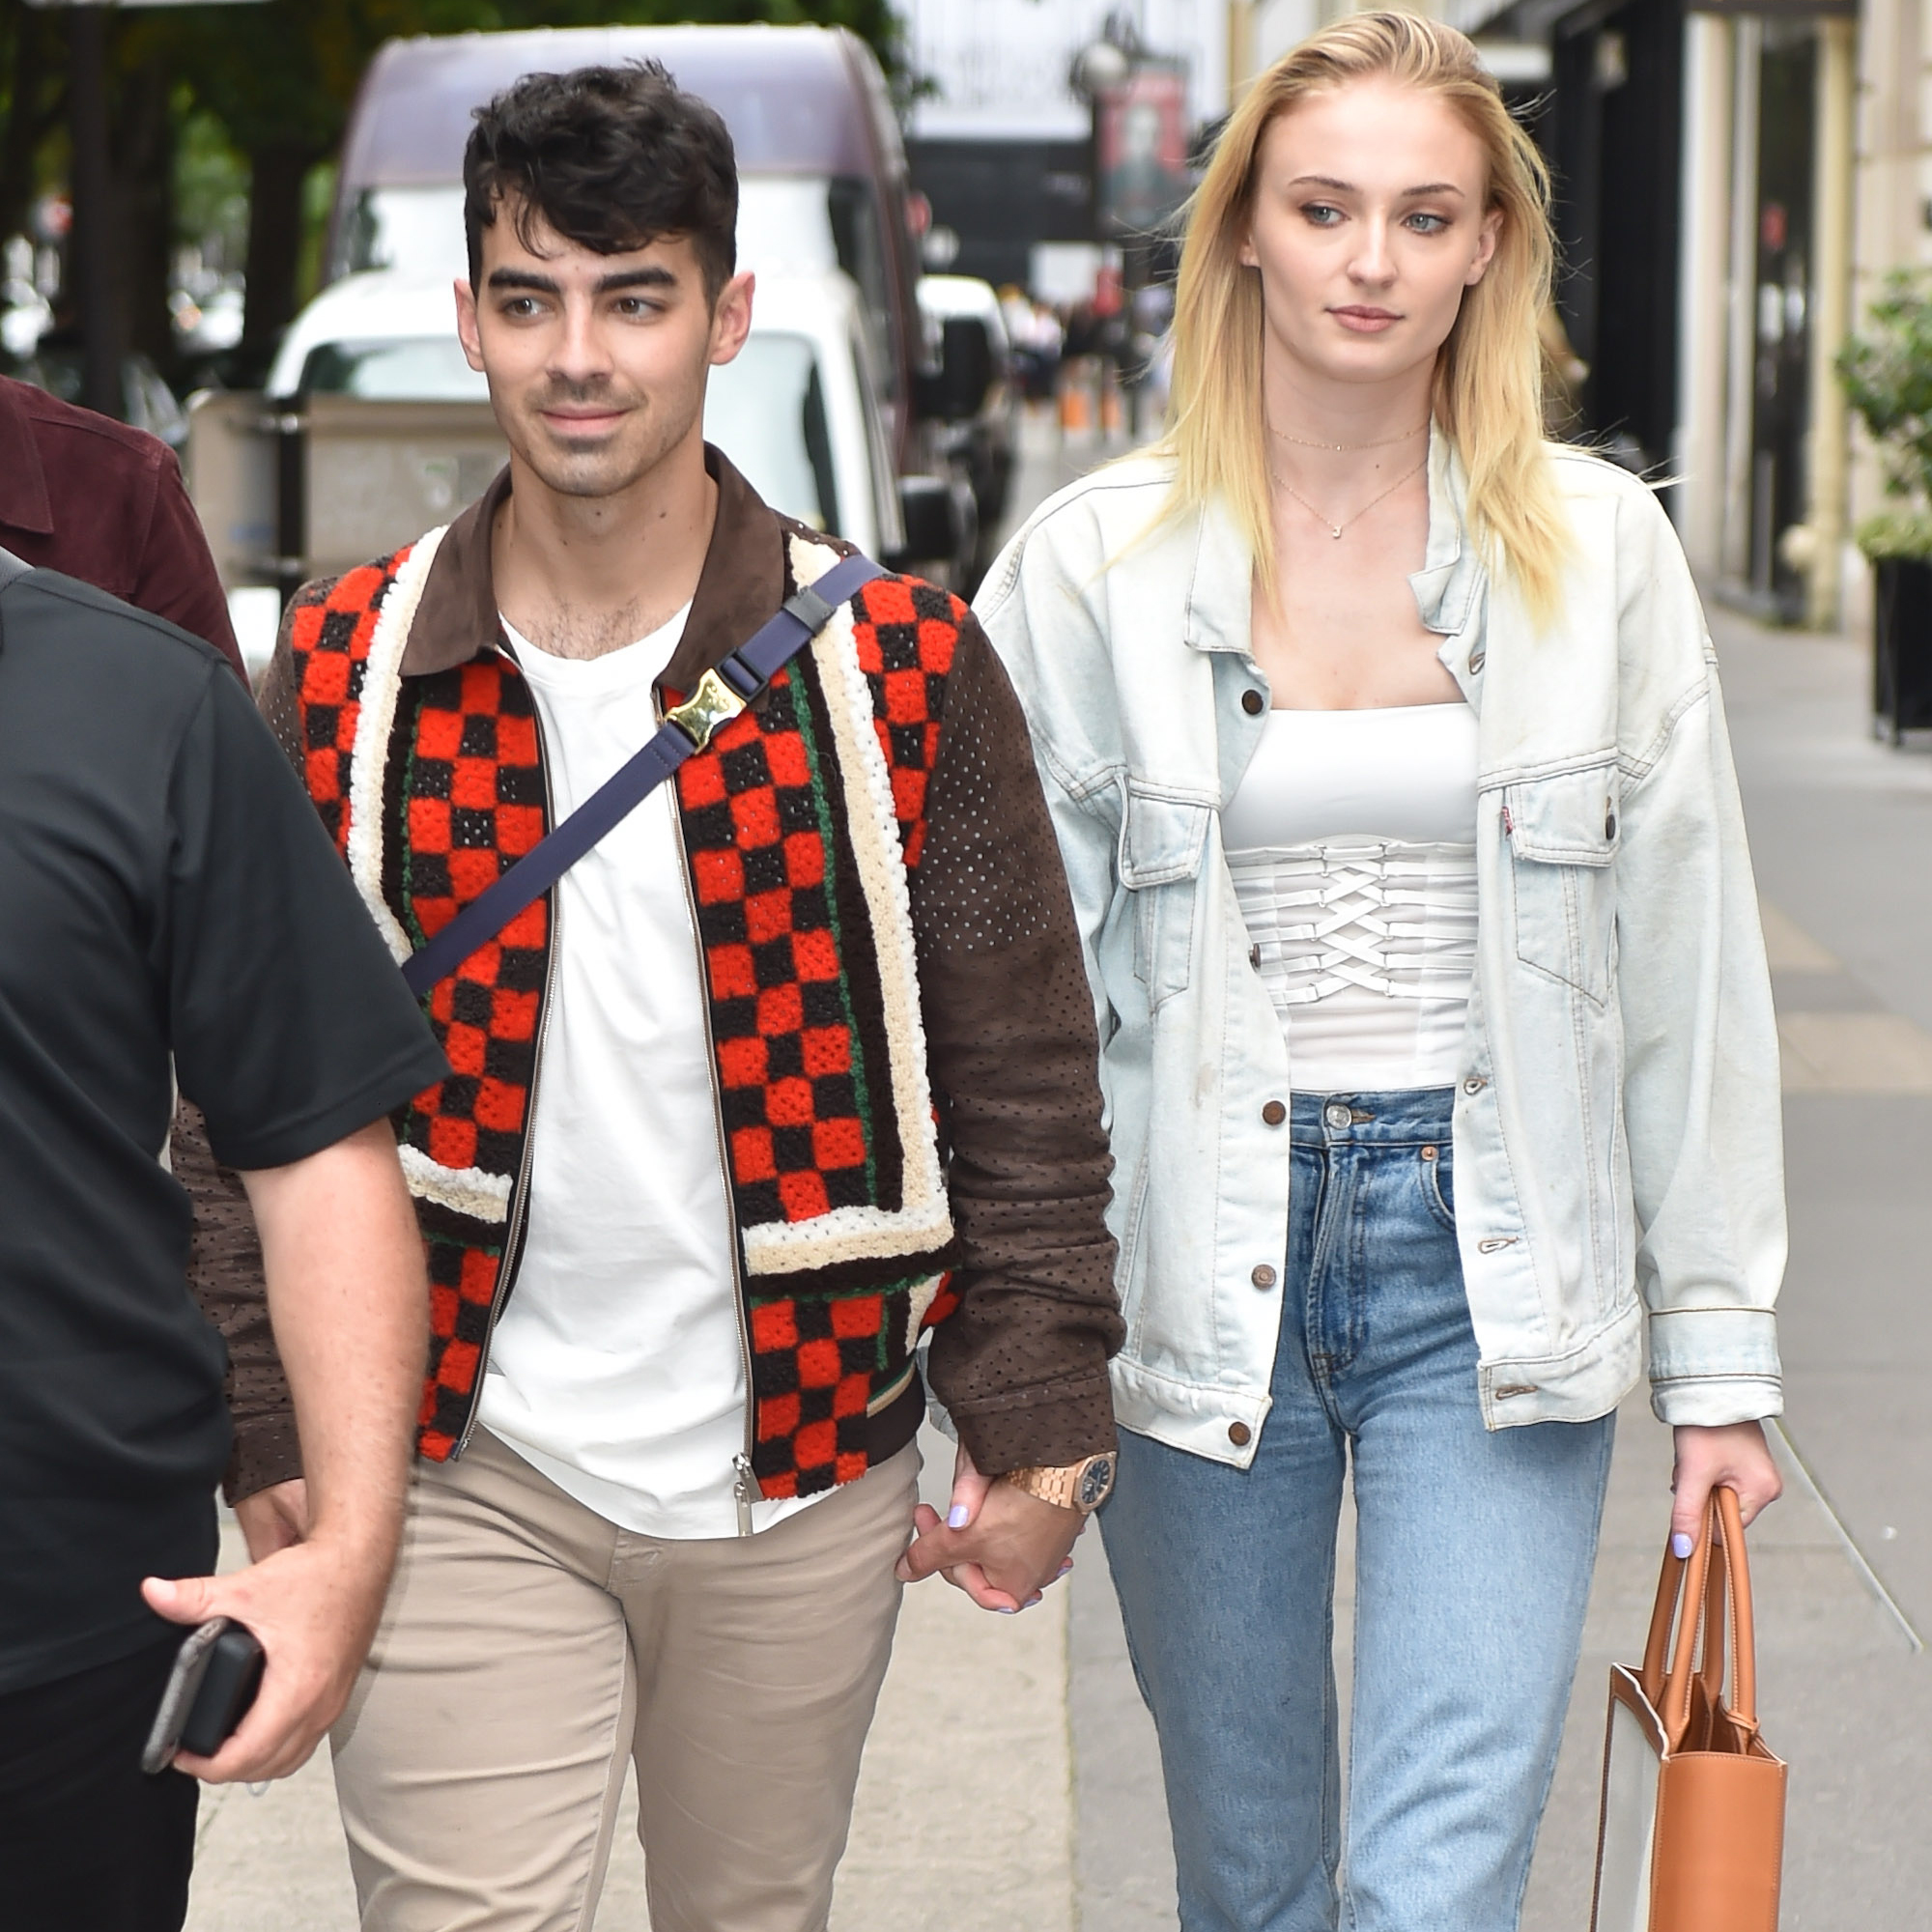 Sophie Turner and Joe Jonas Jet to South of France for Wedding No. 2